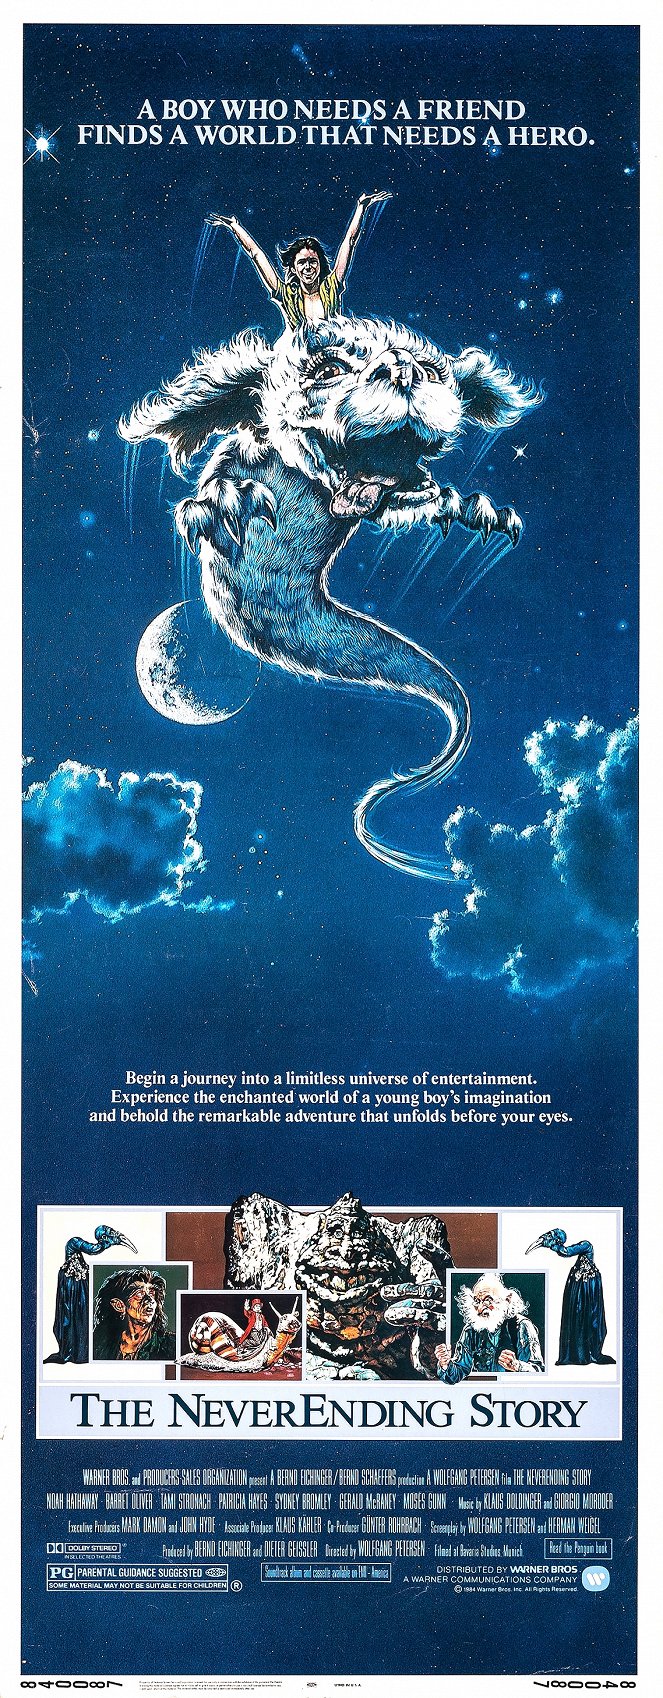 The NeverEnding Story - Posters